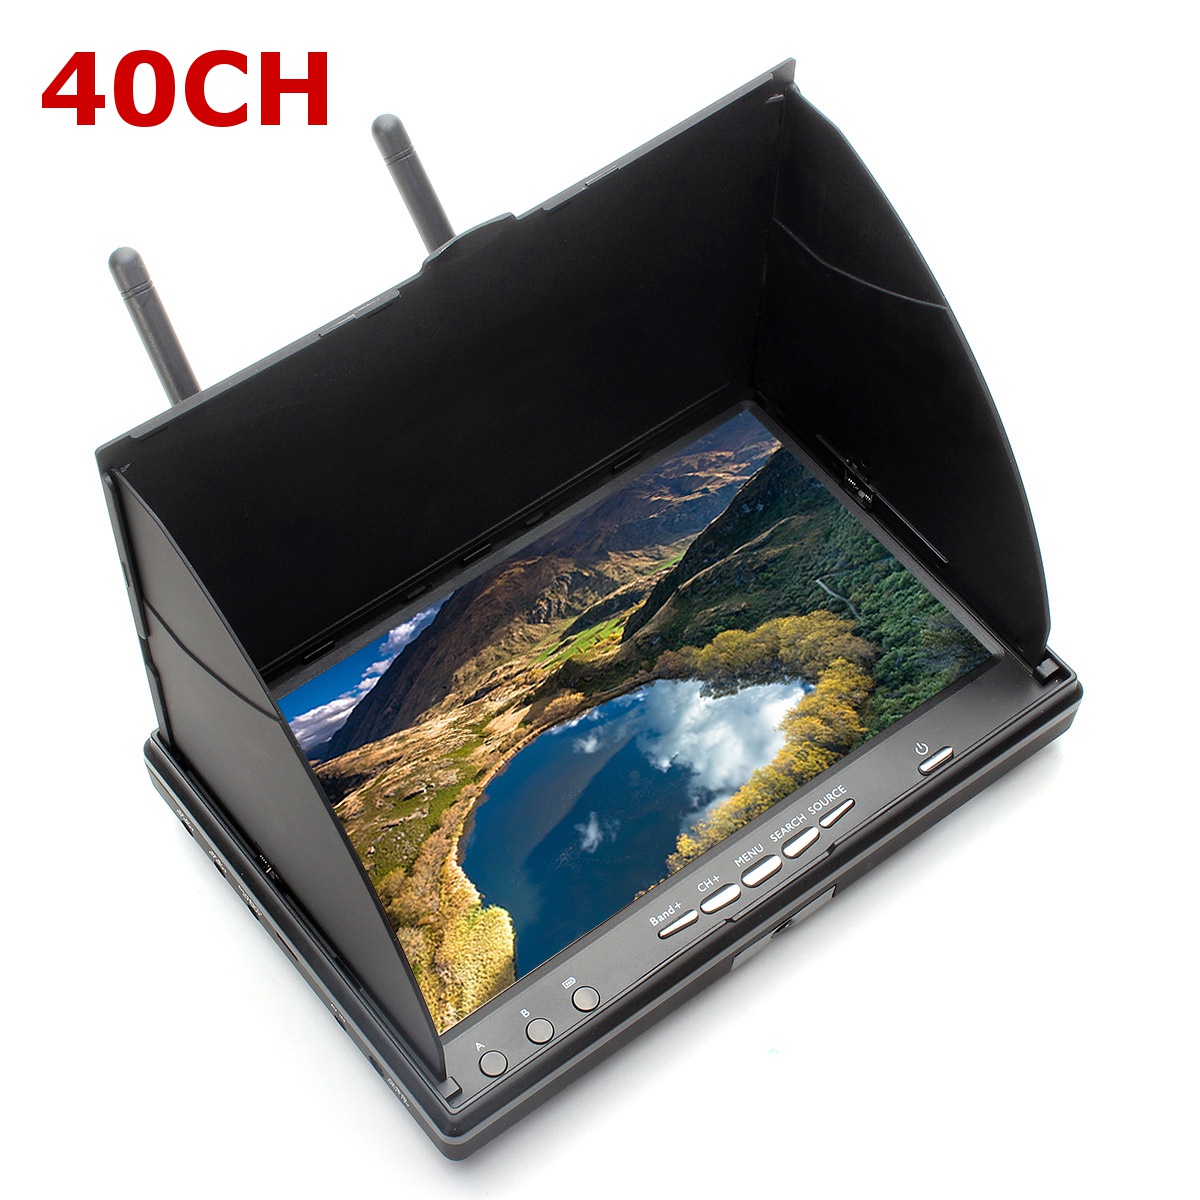 Eachine LCD5802S 40CH  5.8G 7 Inch Diversity Receiver Monitor